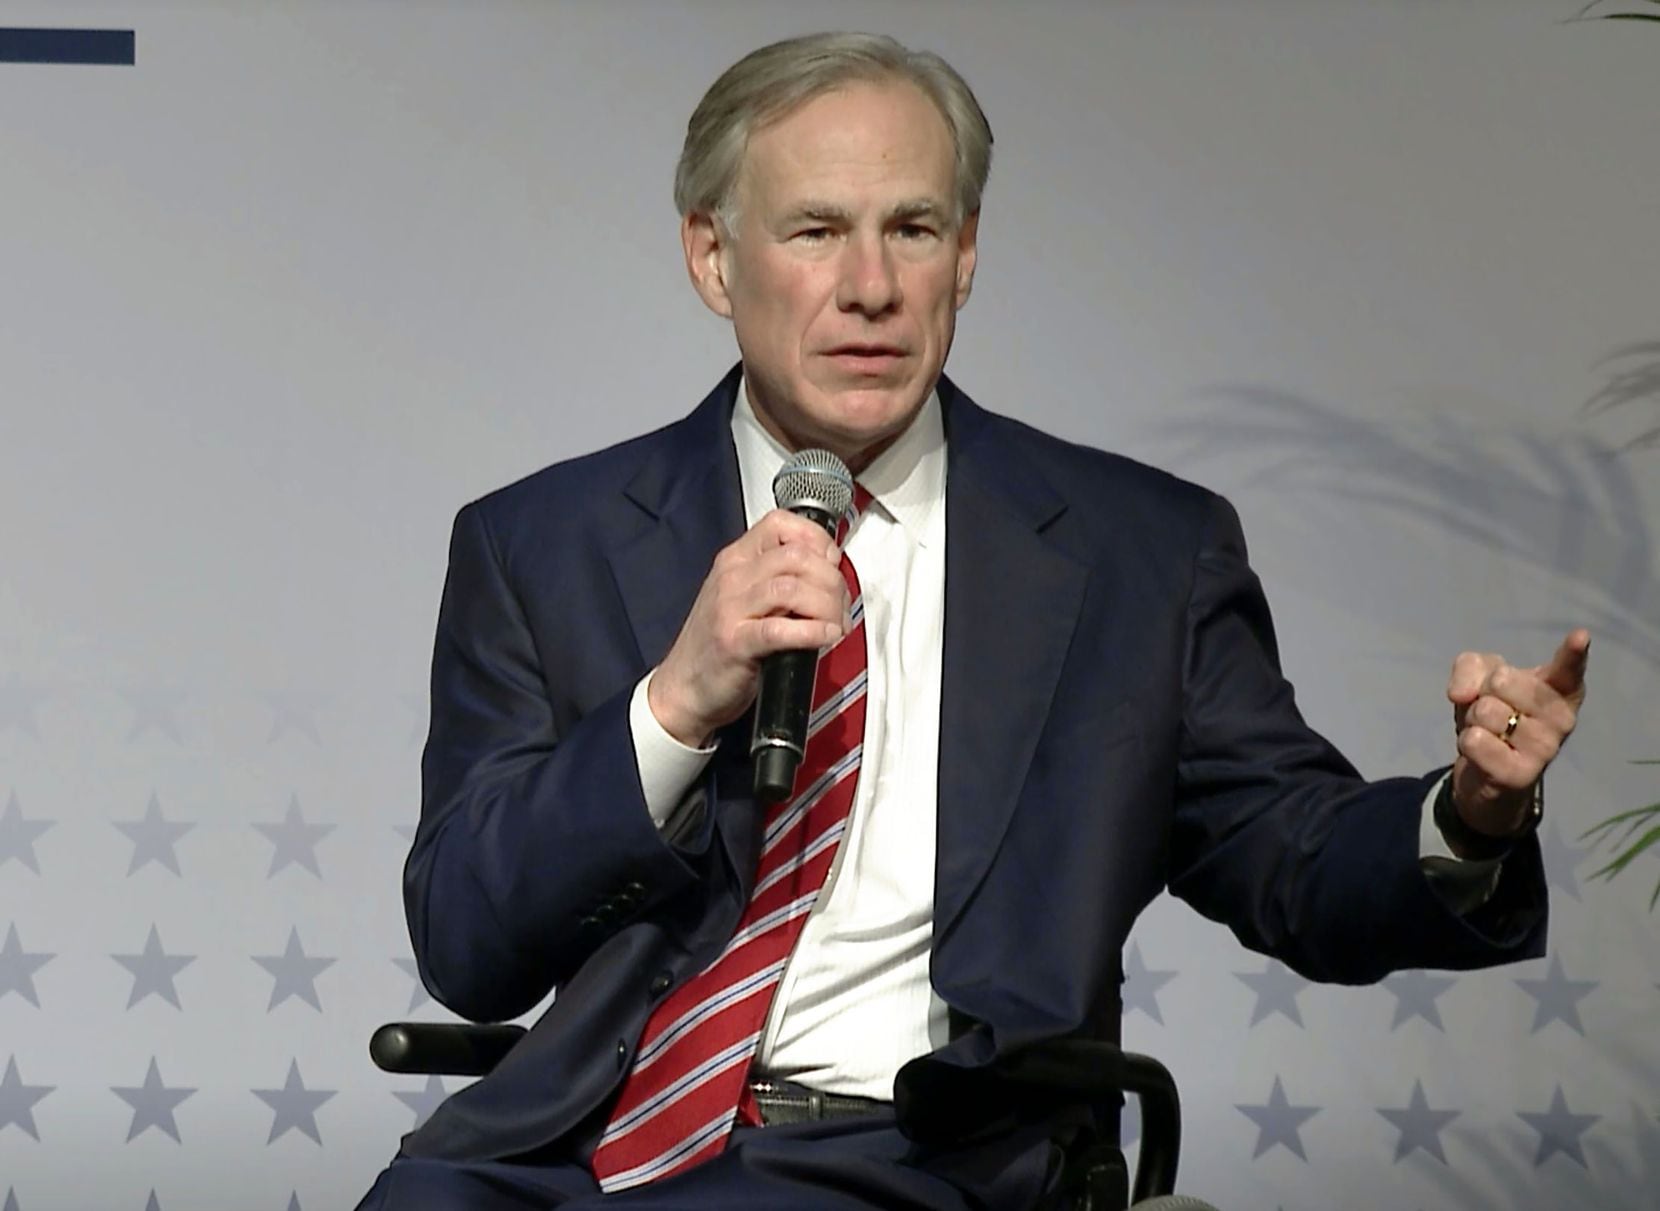 Texas Gov. Greg Abbott, making a COVID-19-related announcement in March, later issued a sweeping executive order that bans mask requirements by governments and public school systems.